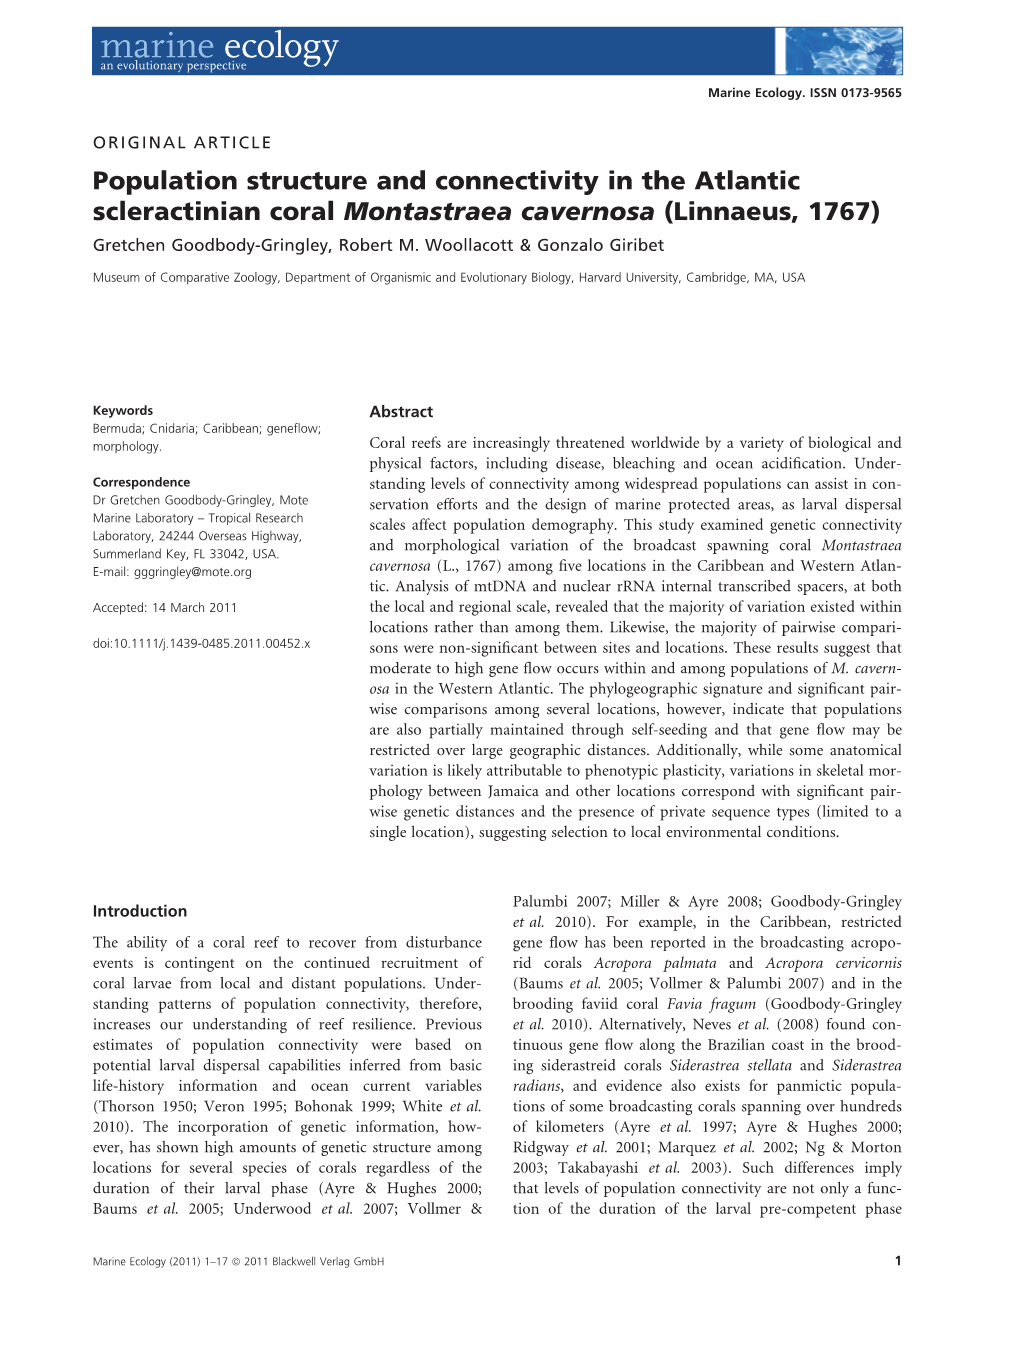 Population Structure and Connectivity in the Atlantic Scleractinian Coral Montastraea Cavernosa (Linnaeus, 1767) Gretchen Goodbody-Gringley, Robert M